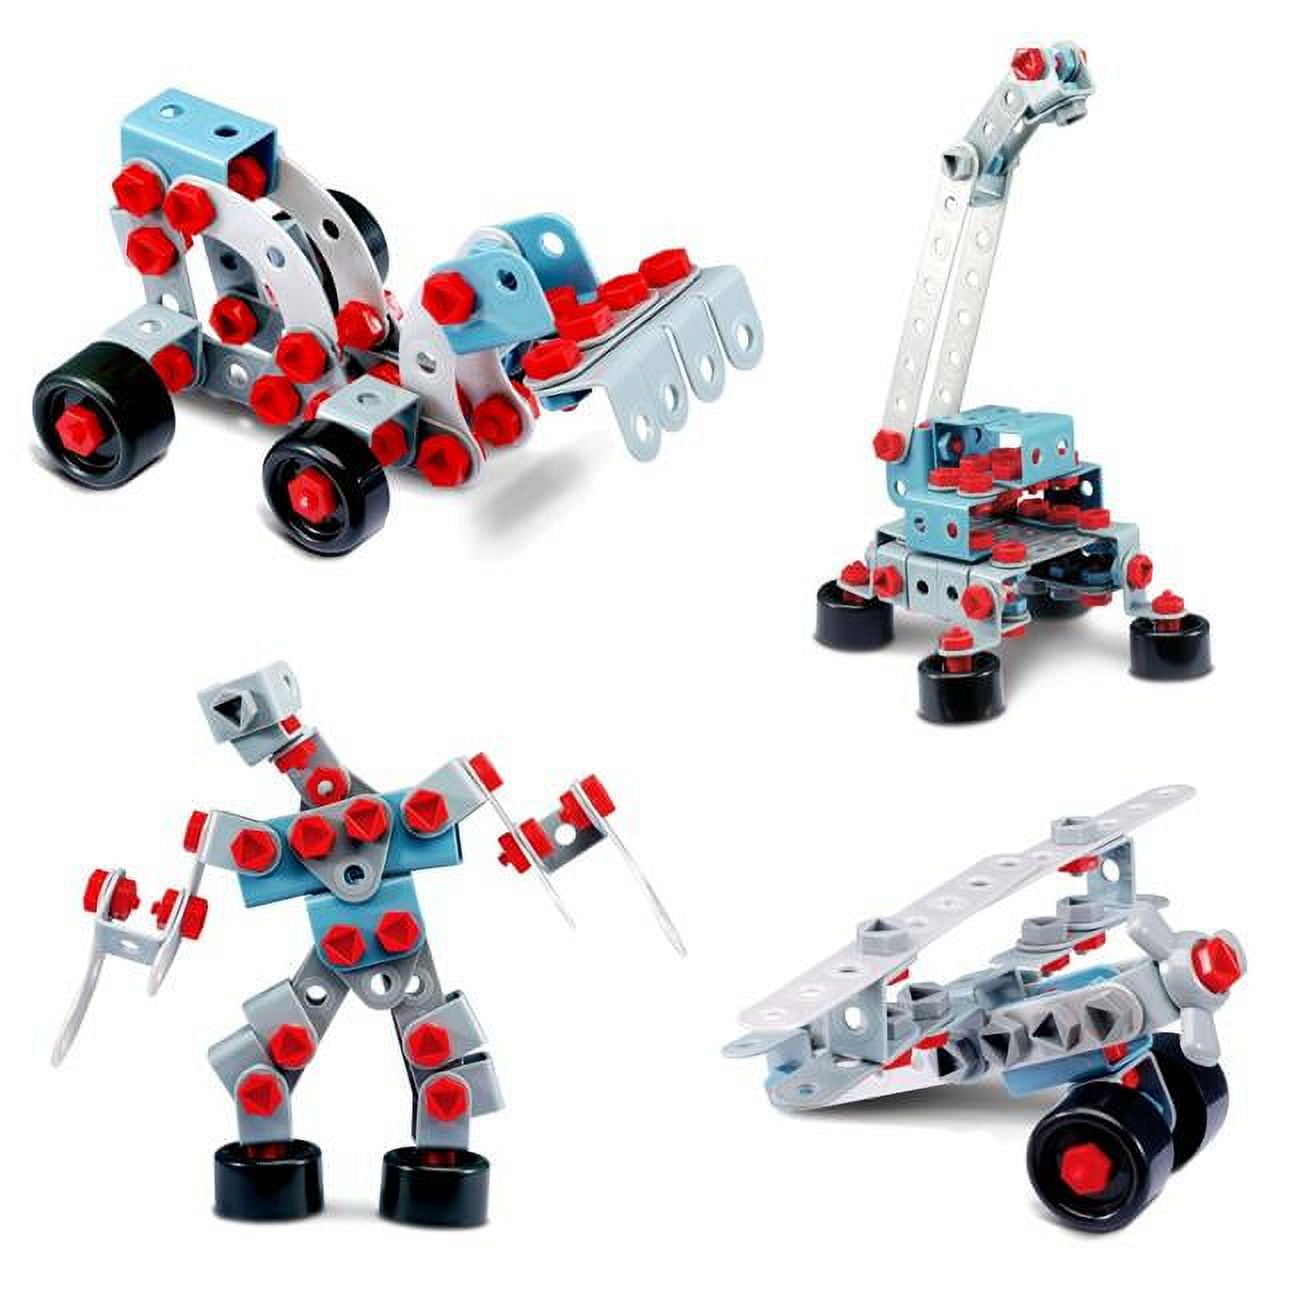 Ps1302 Take Apart Educational Construction Toy With Electric Toy Drill Building Blocks Set